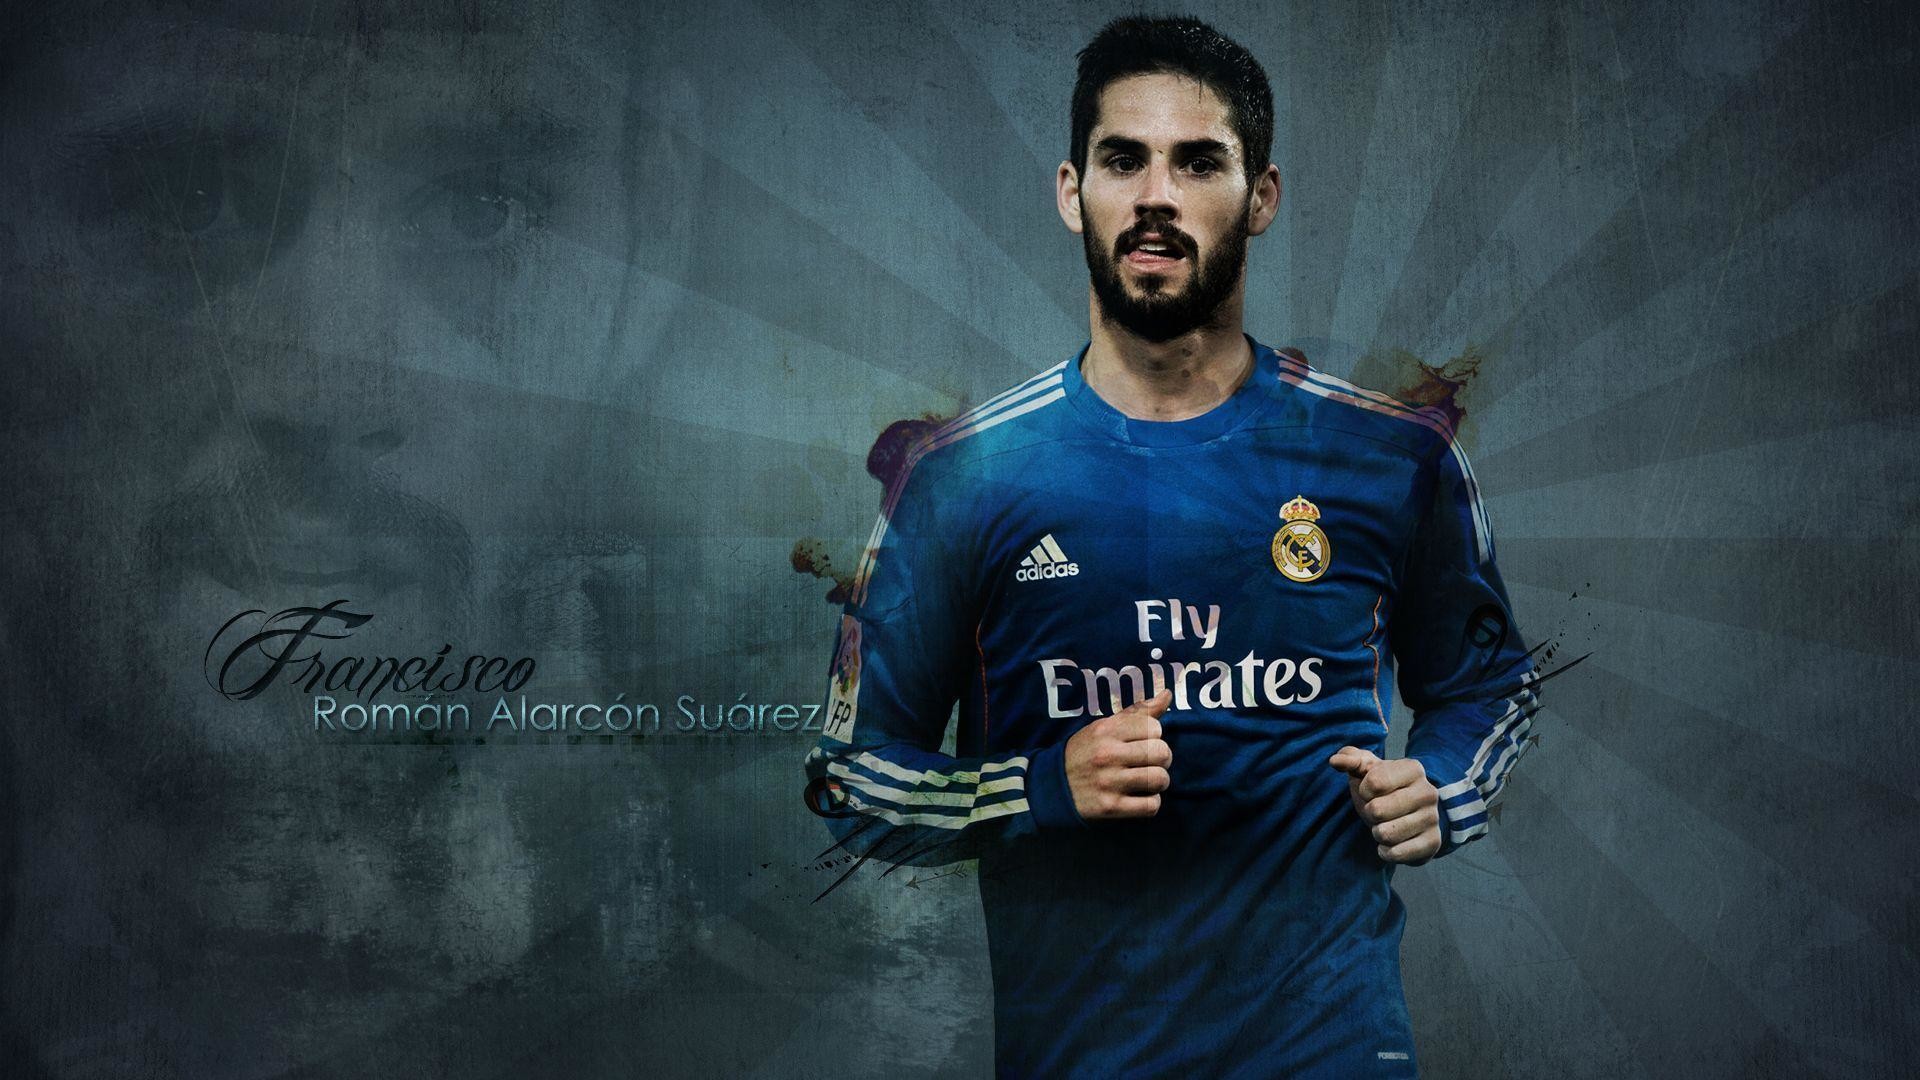 1920x1080 Category: Football | Download HD Wallpaper - Page 3›› Page 3 .